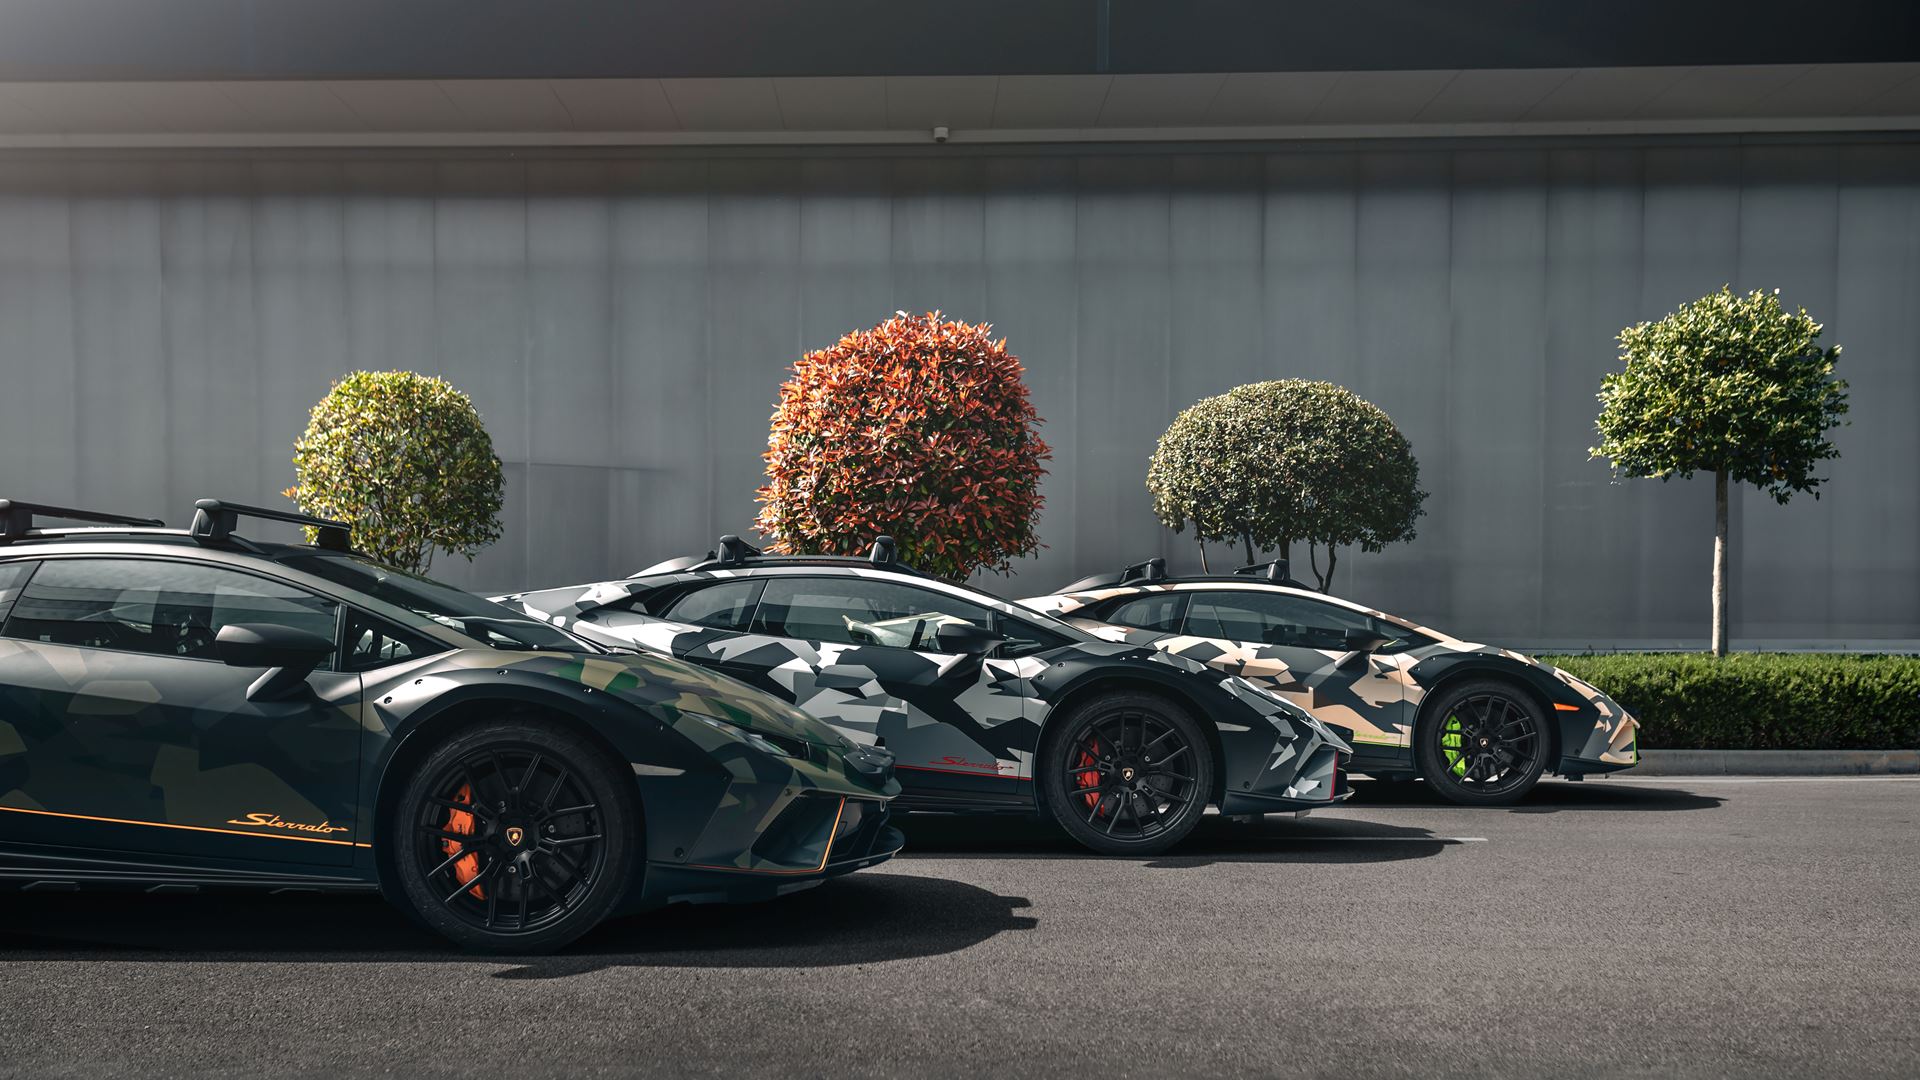 The Lamborghini Huracan Sterrato All Terrain gets four camouflage liveries, all of which share a matte black roof and rear hood